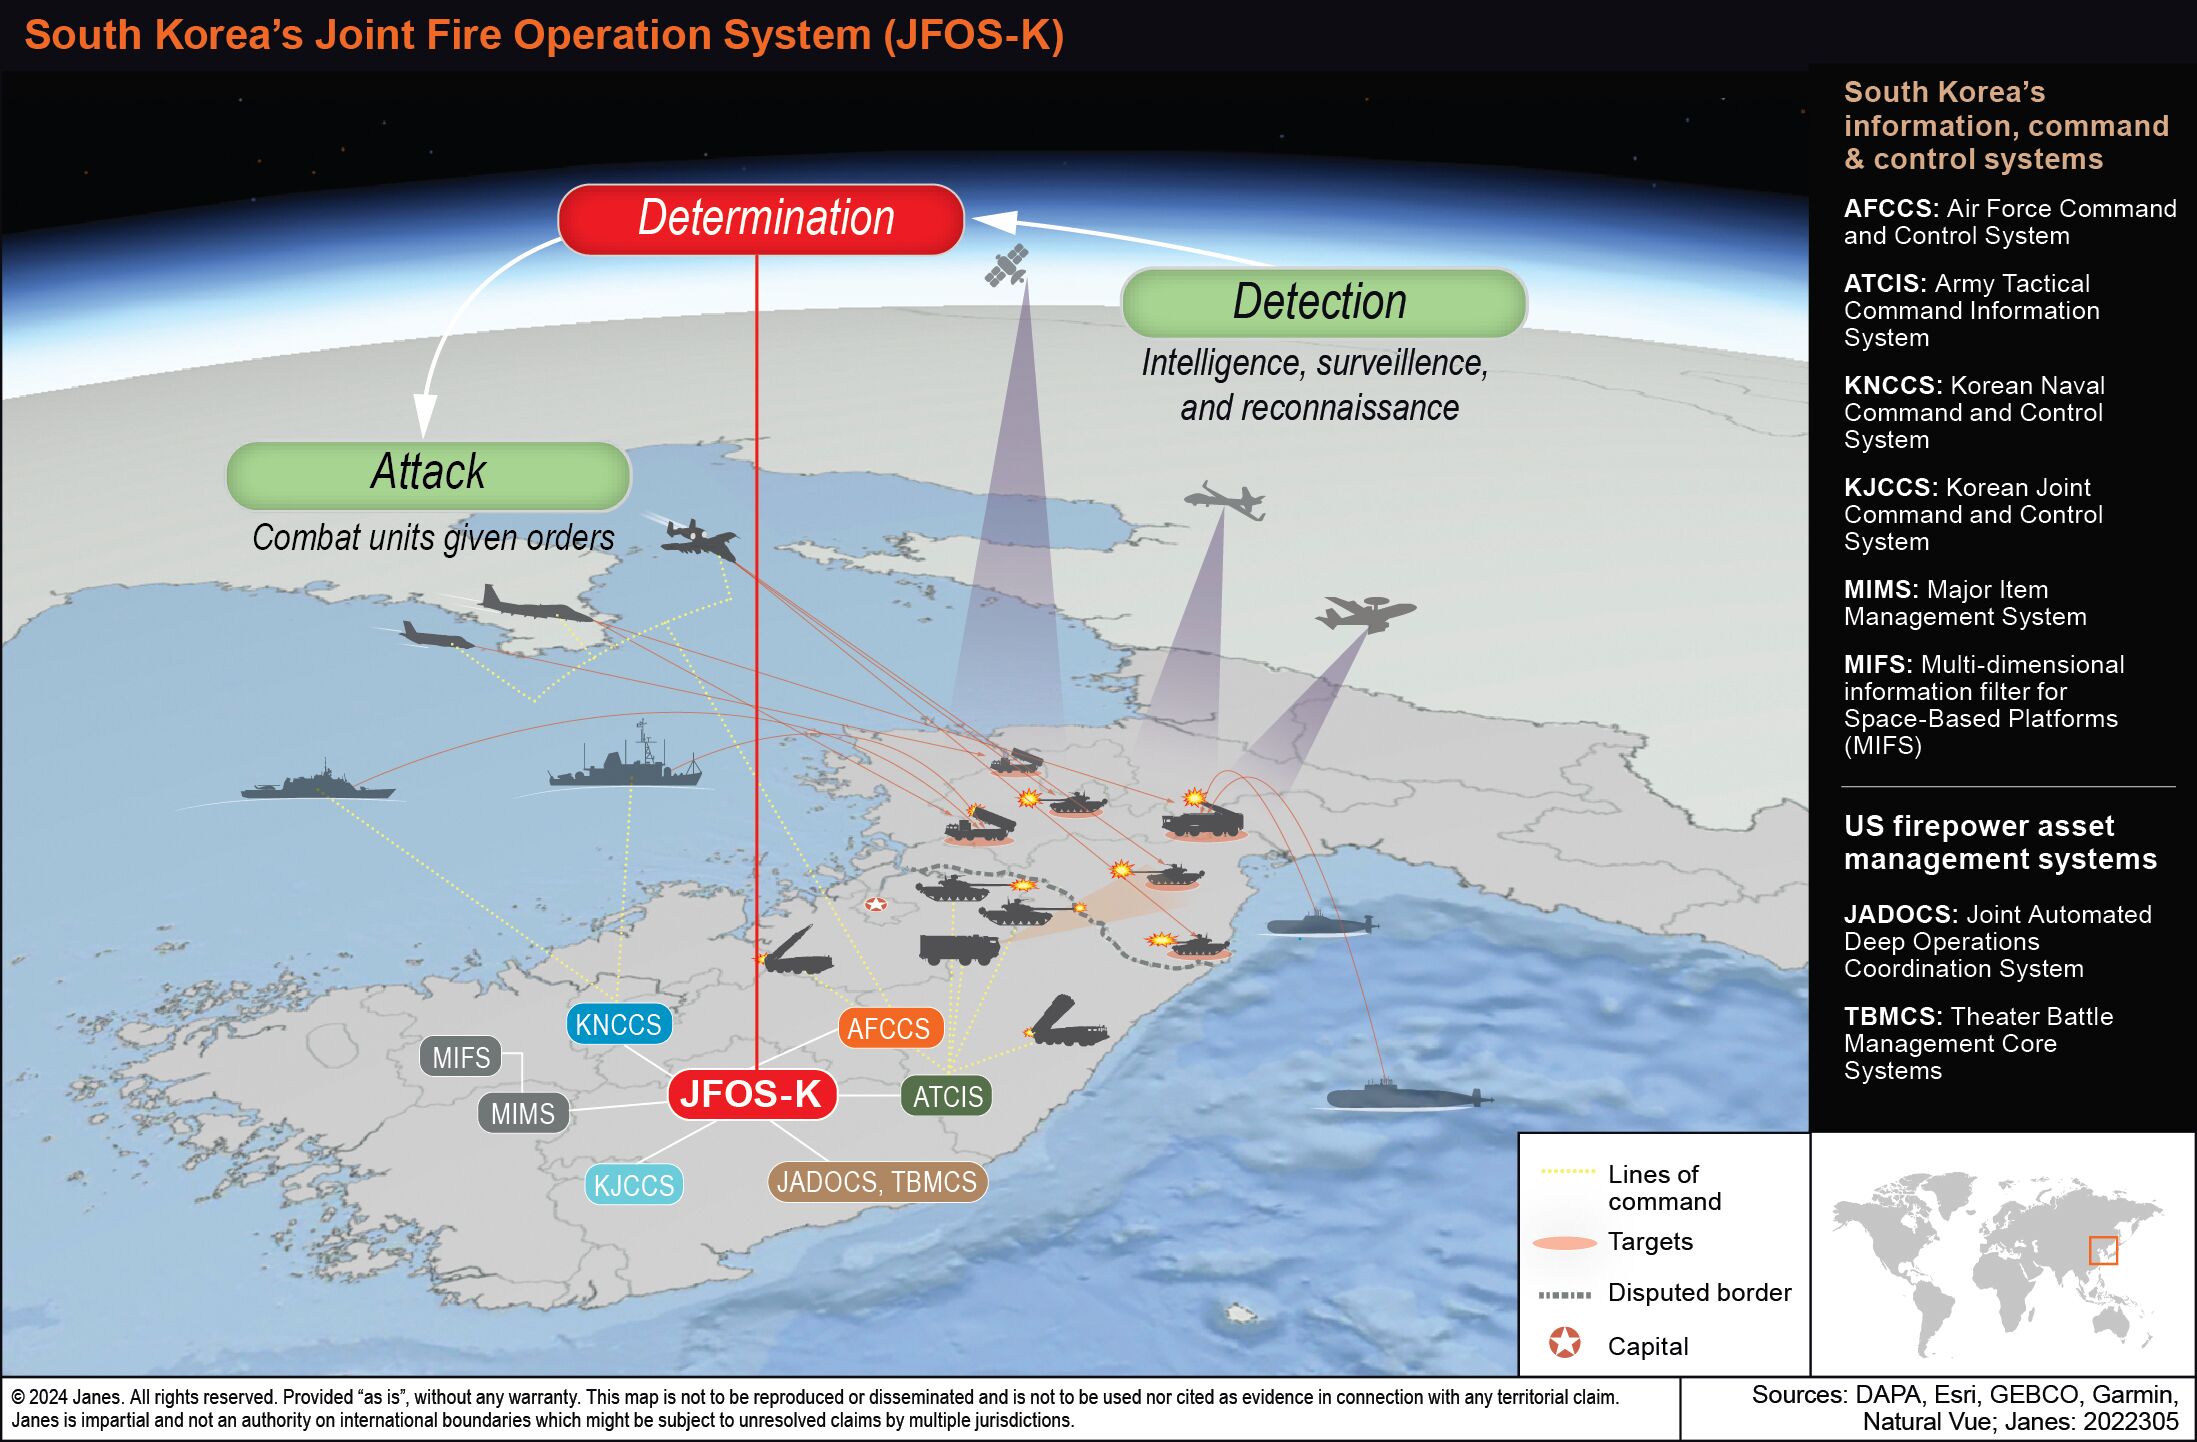 South Korea improves Joint Fire Operation System